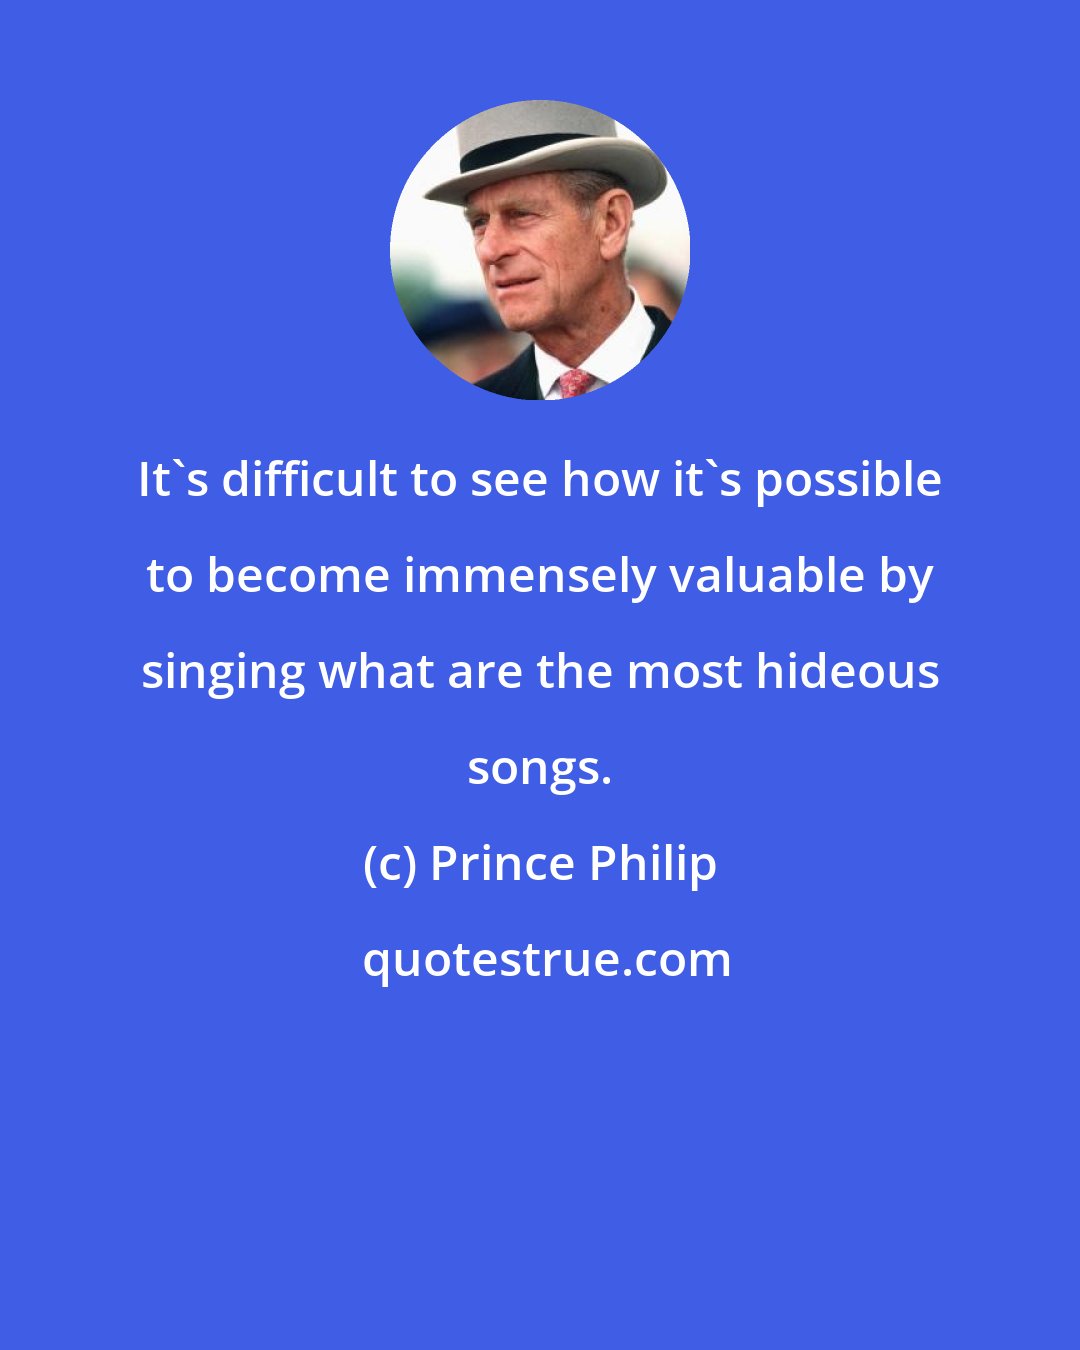 Prince Philip: It's difficult to see how it's possible to become immensely valuable by singing what are the most hideous songs.